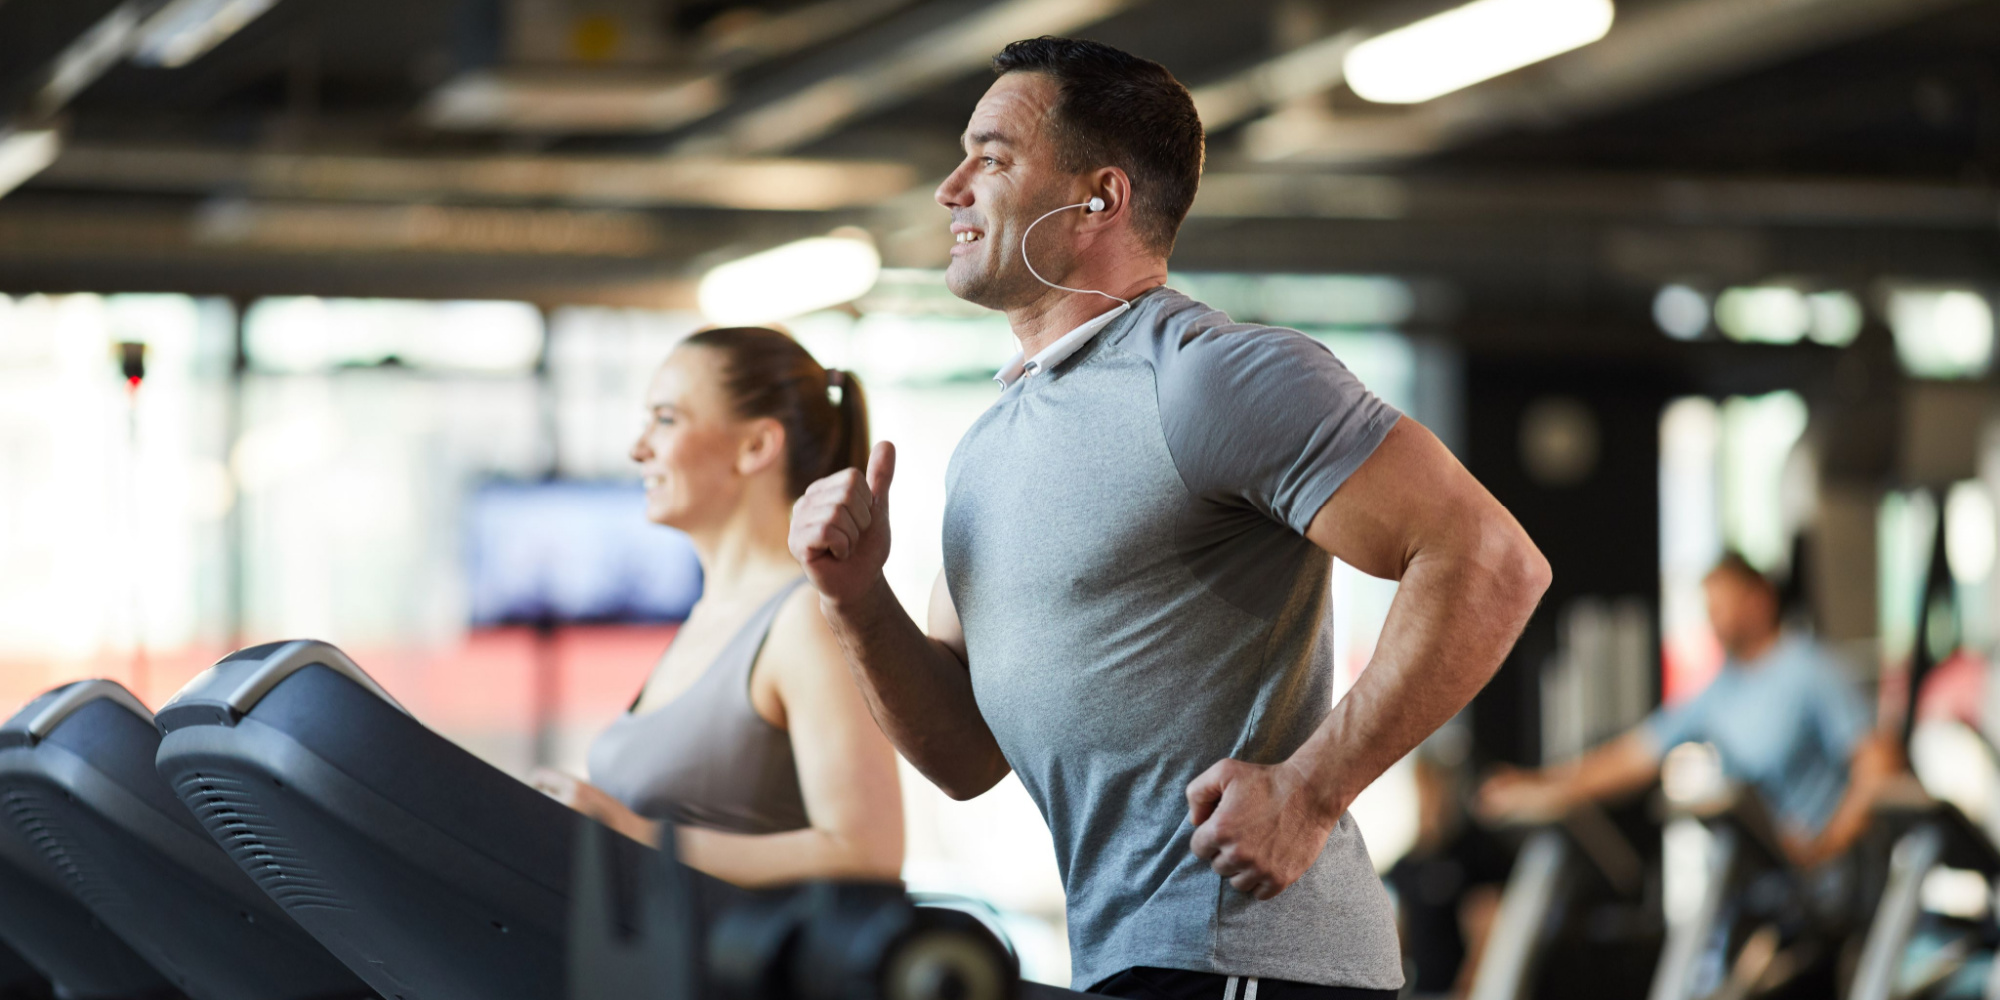 Are there Benefits to Doing Weekly Cardio?